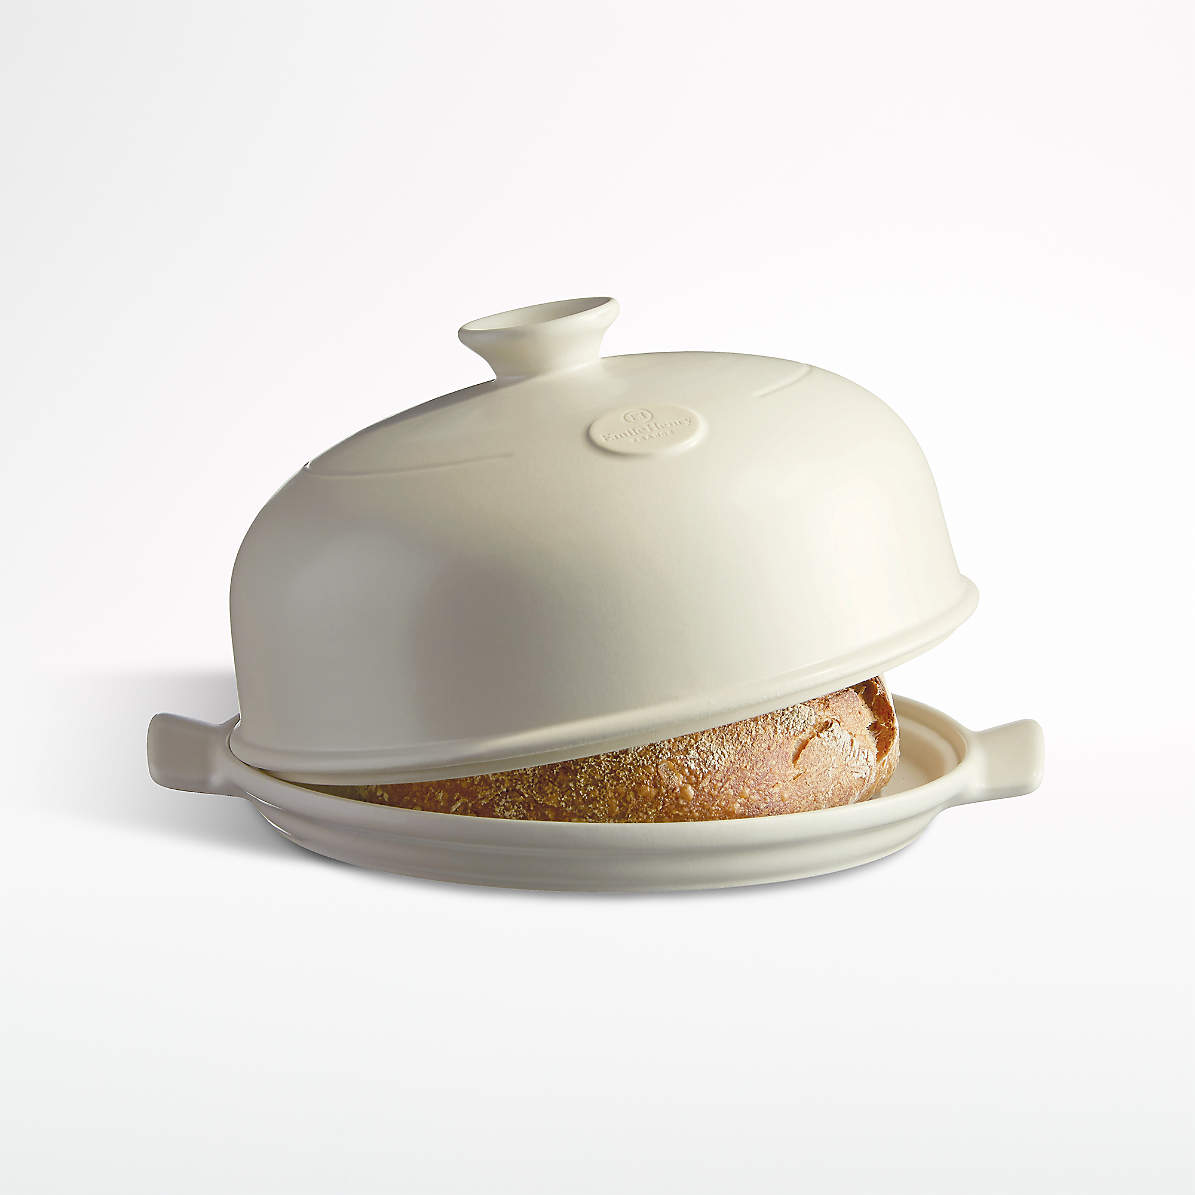 Emile Henry Bread Cloche - Charcoal